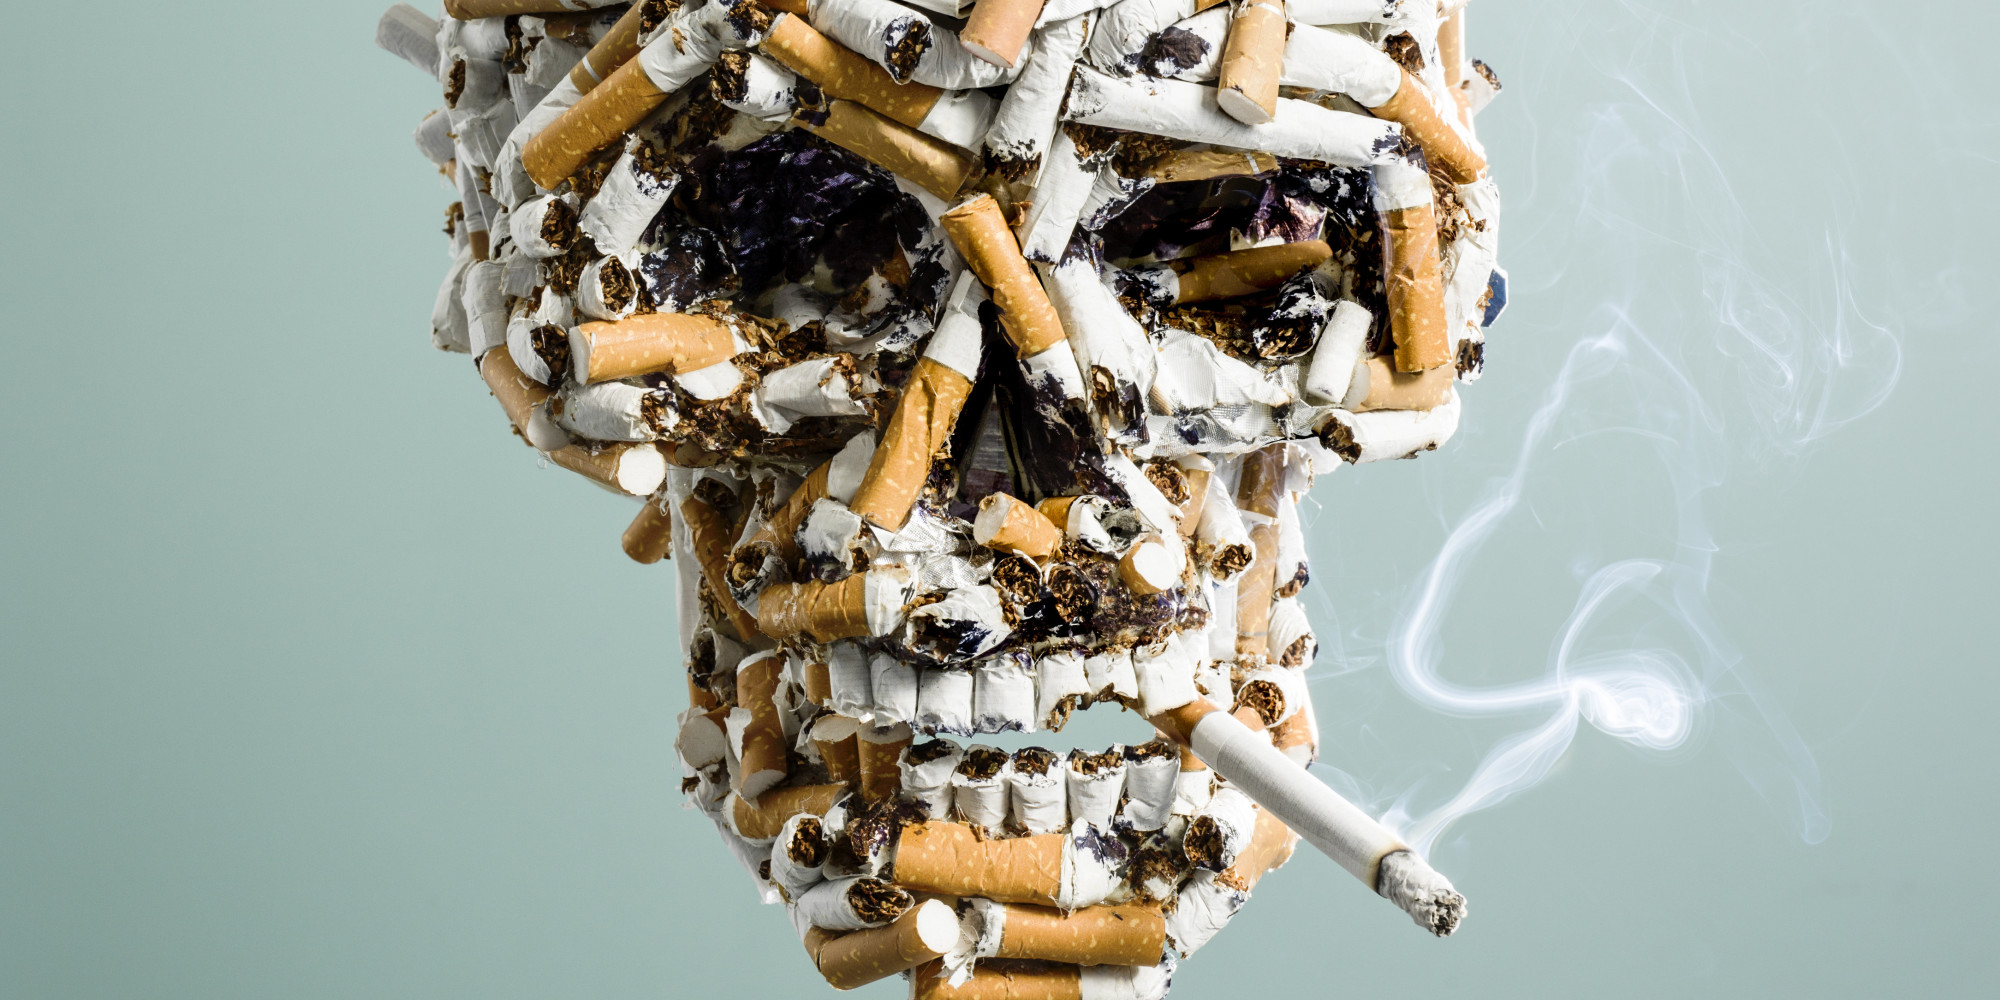 Tripling Tobacco Taxes Worldwide Could Prevent 200 Million Early Deaths